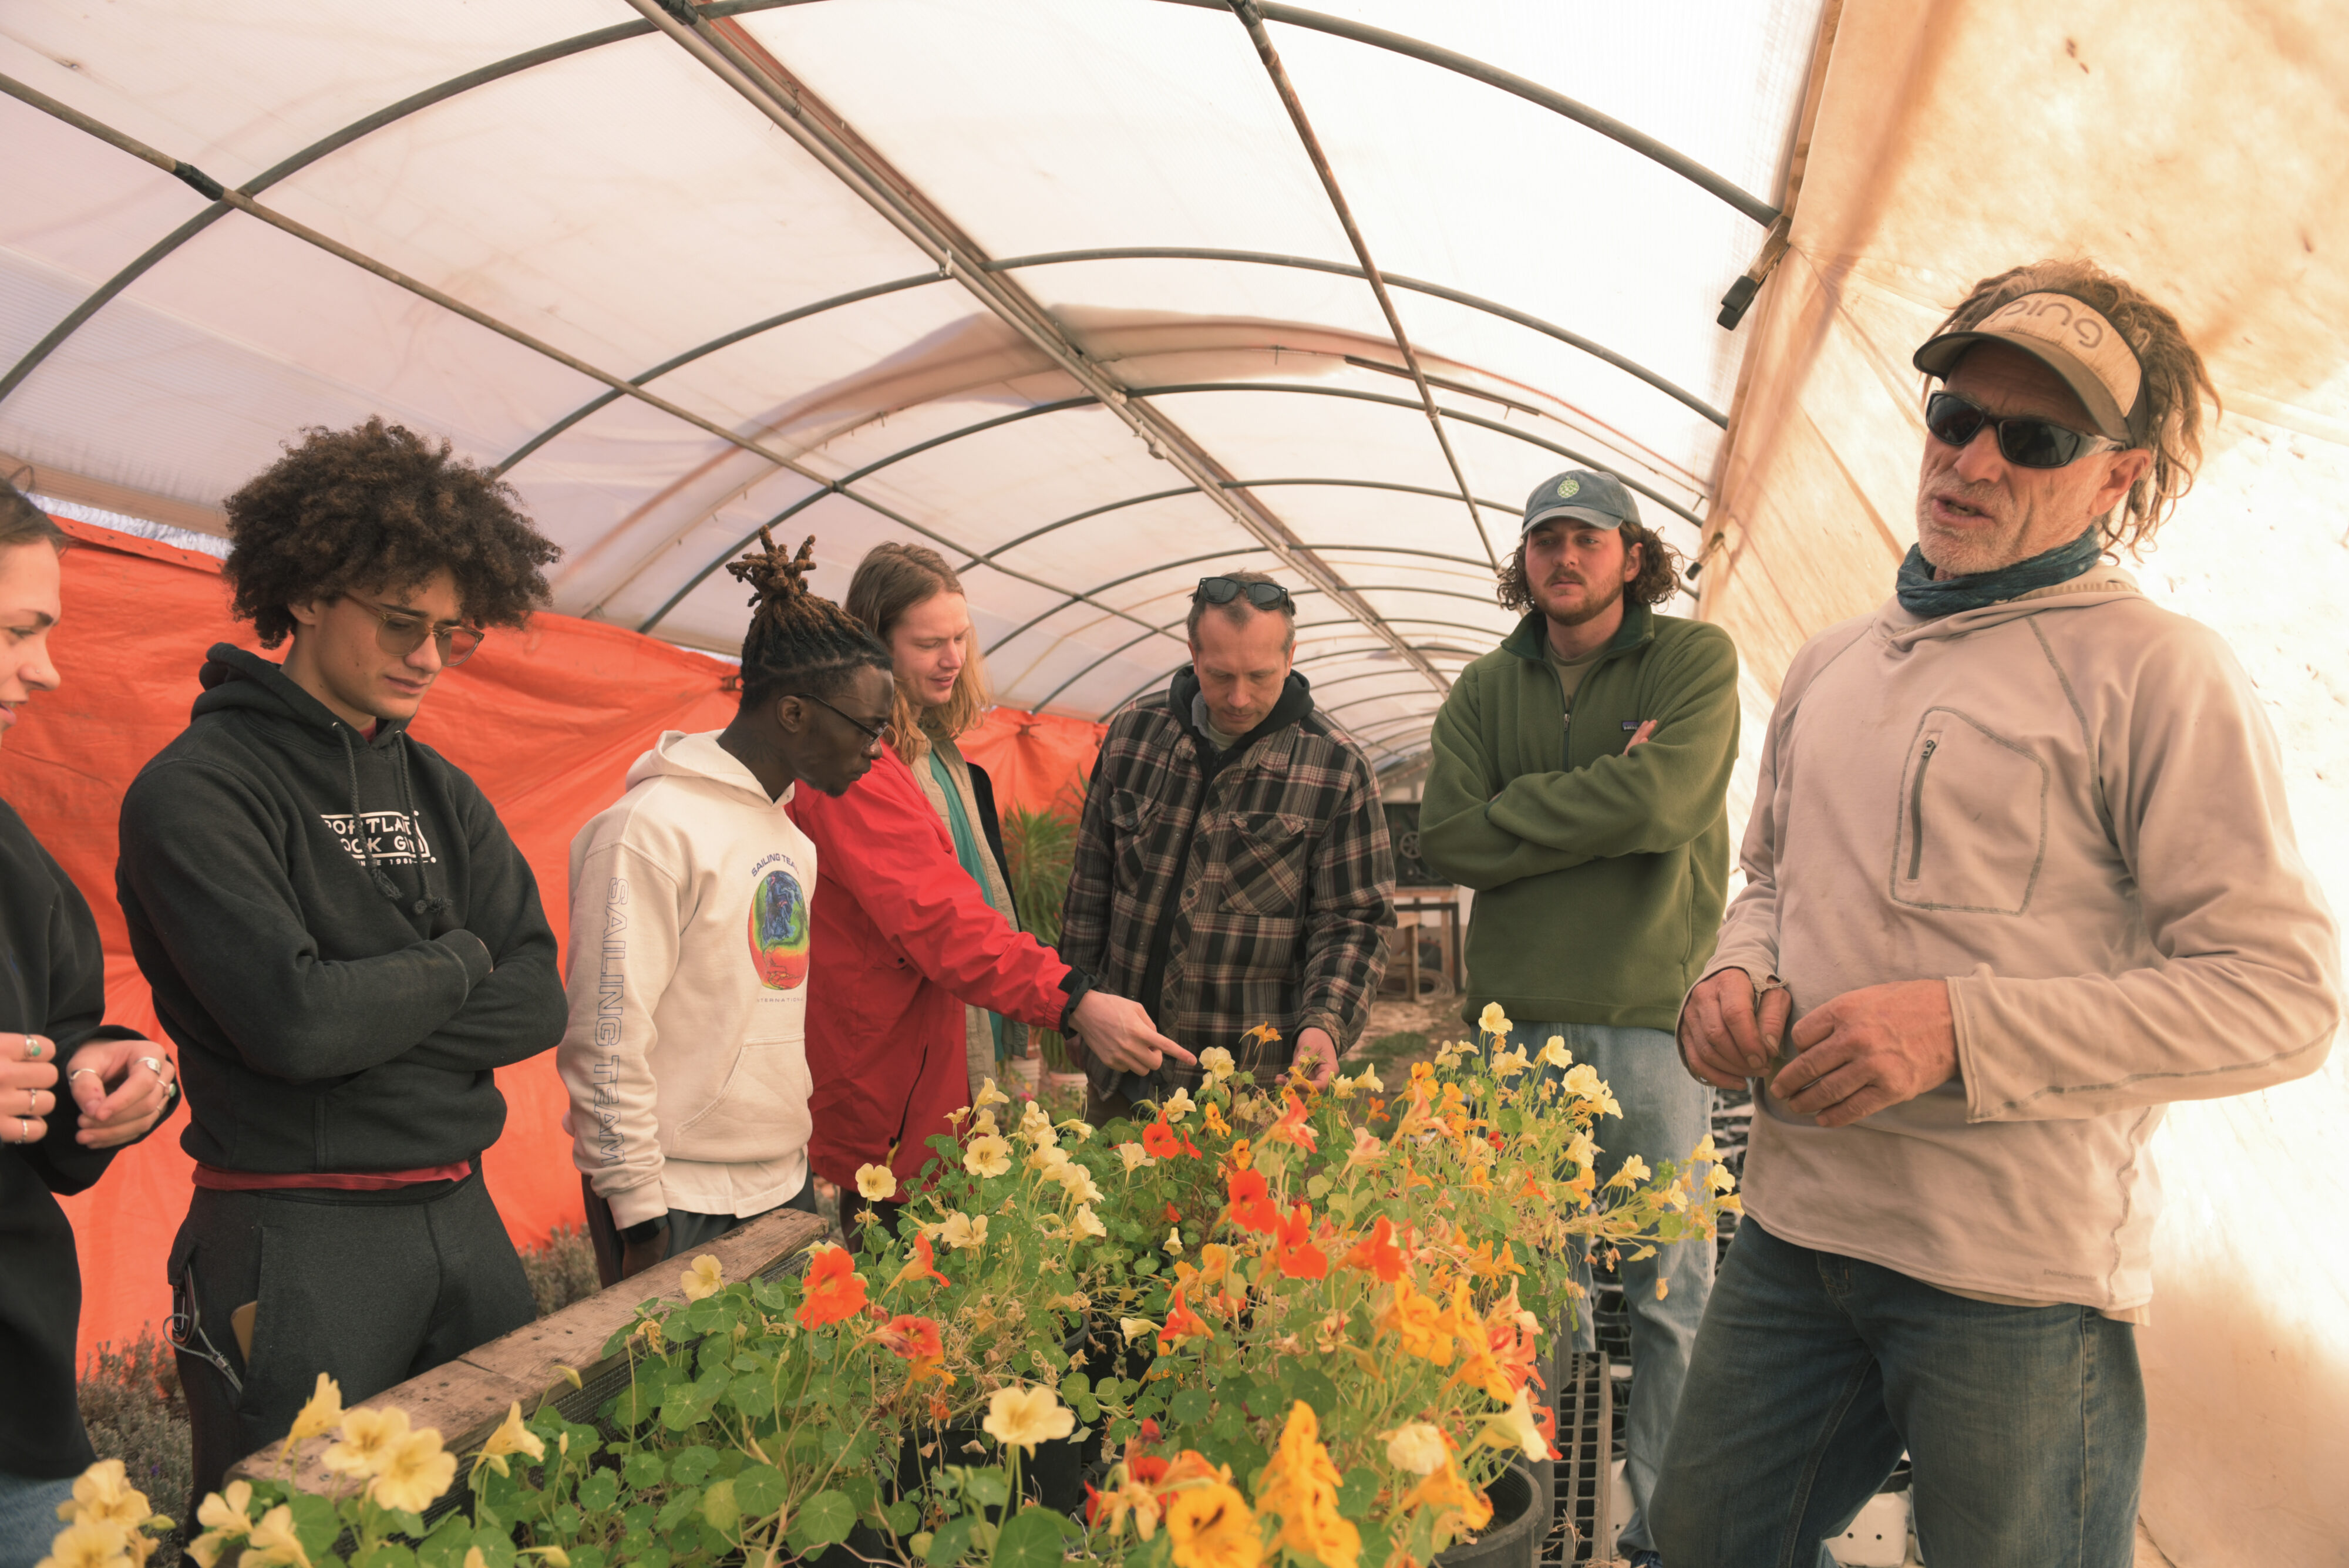 MASA founder Rich Pecoraro stands around some flowering plants with students inside a greenhouse.